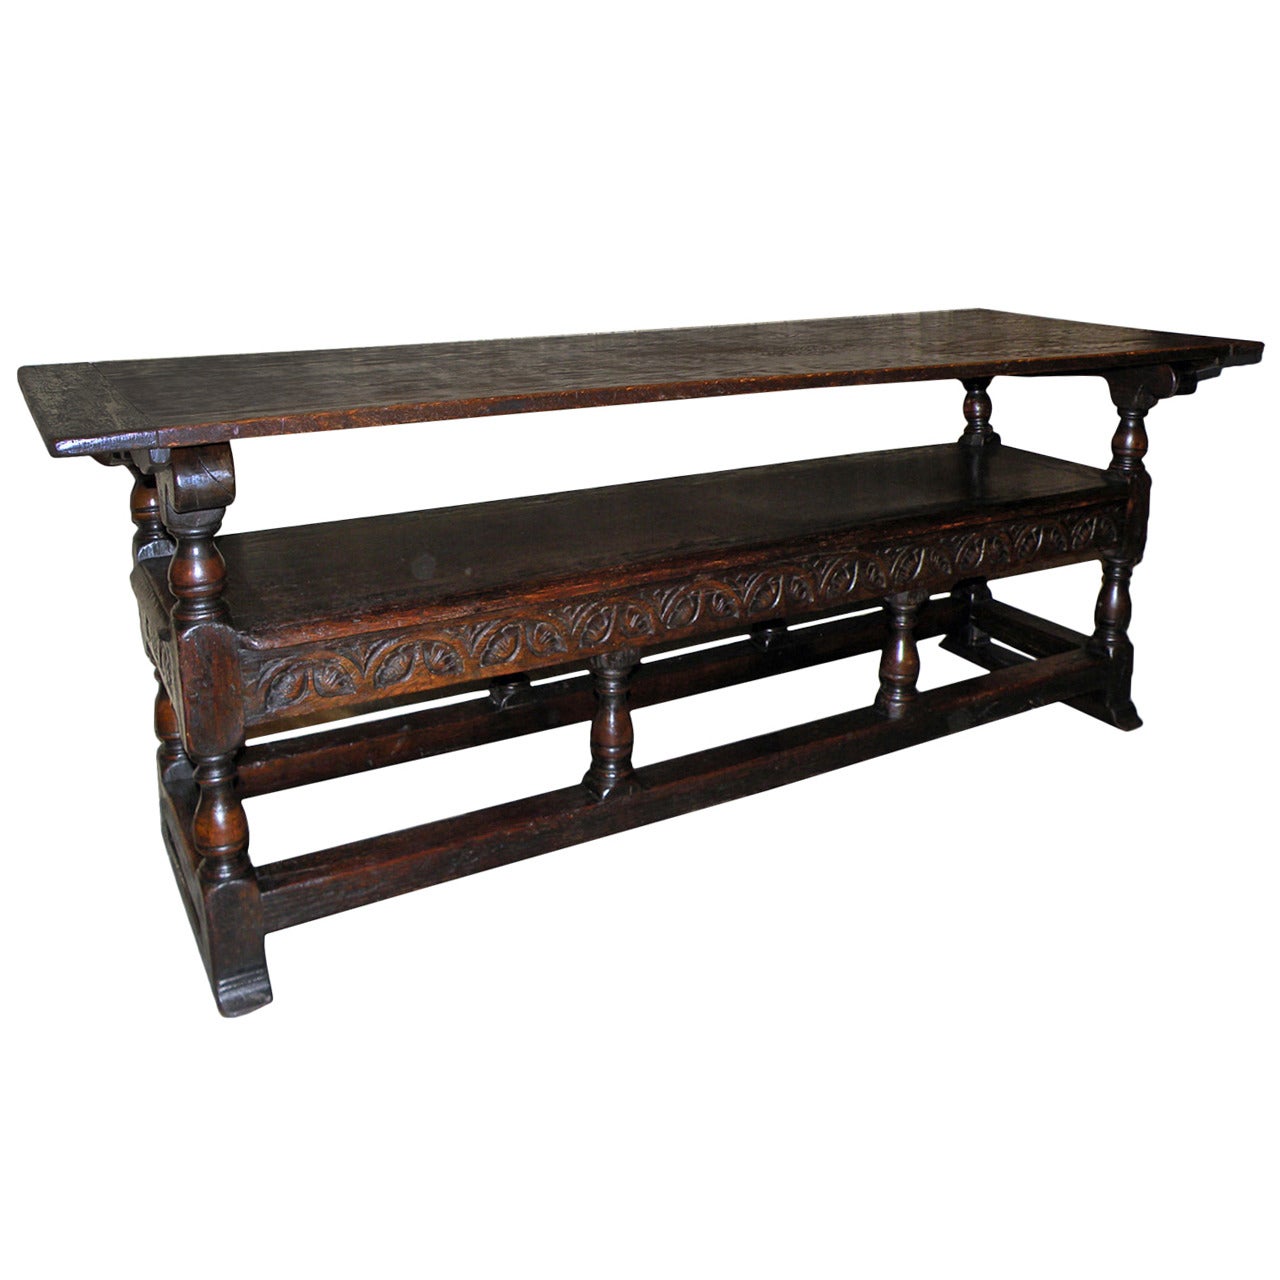 English Jacobean Table and Bench